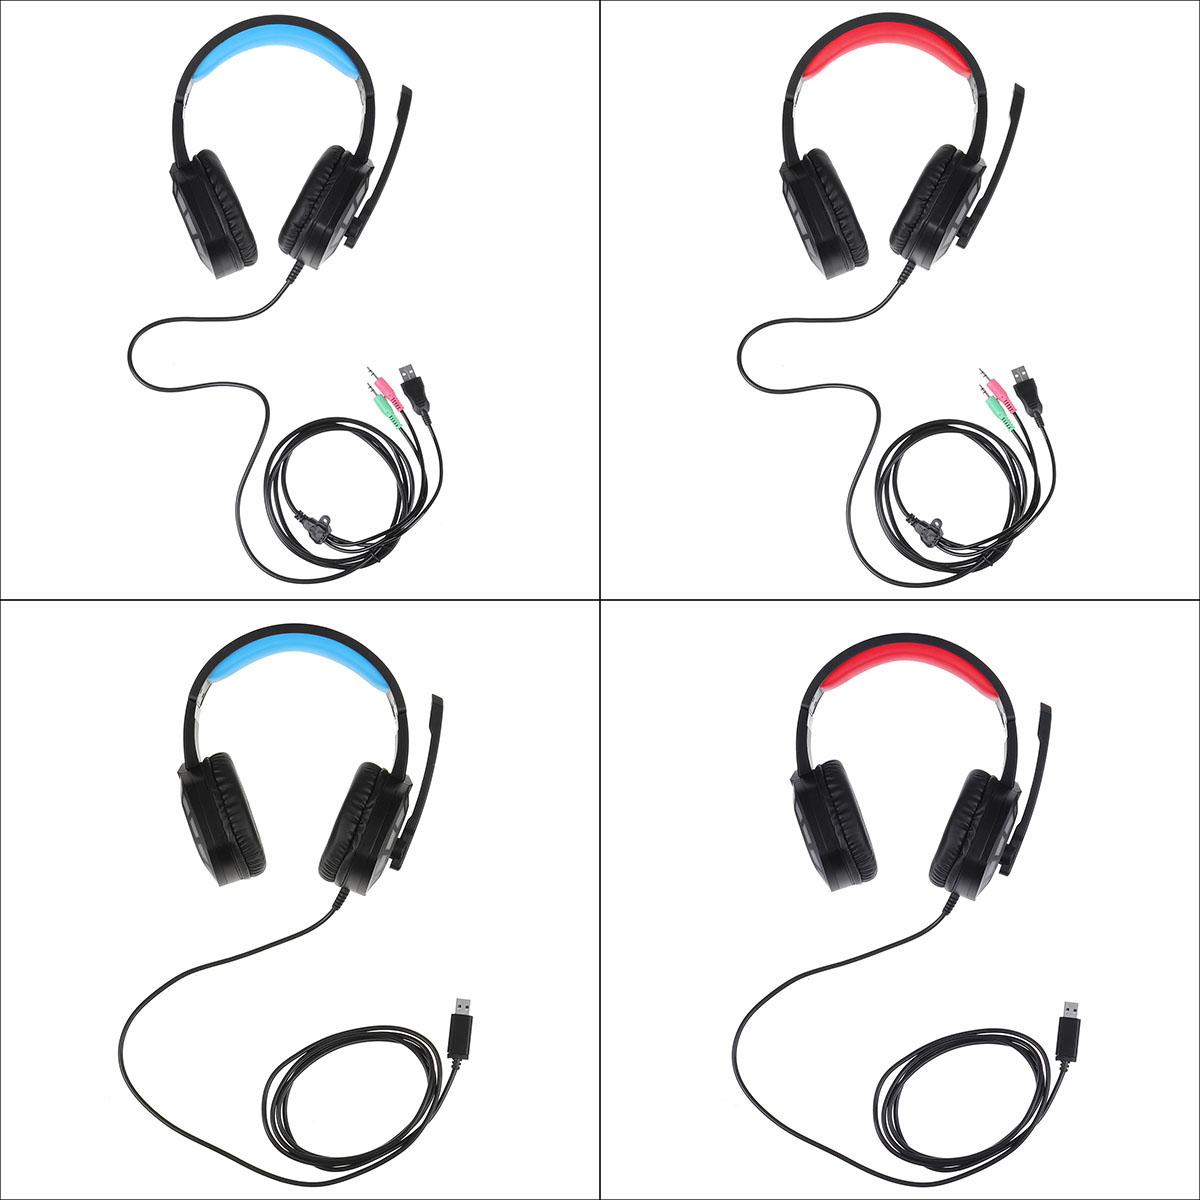 M1-Gaming-Headset-Surround-Sound-Music-Earphones-USB-71--35mm-Wired-RGB-Backlight-Game-Headphones-wi-1827492-21